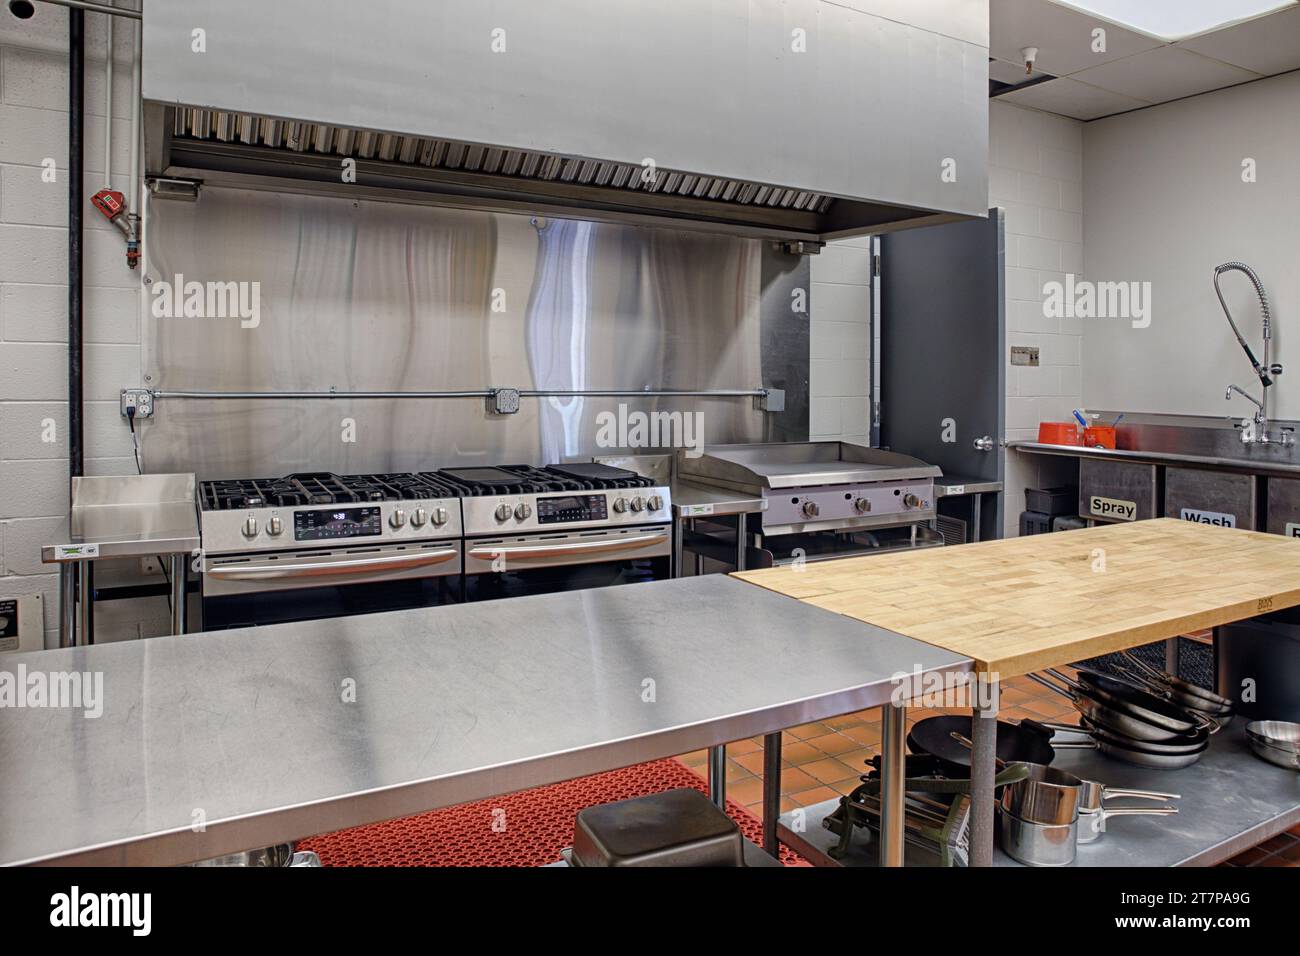 A modern stainless steel commercial kitchen, with prep area, grill, griddles, range, toasters, microwaves, and fire supression. Stock Photo